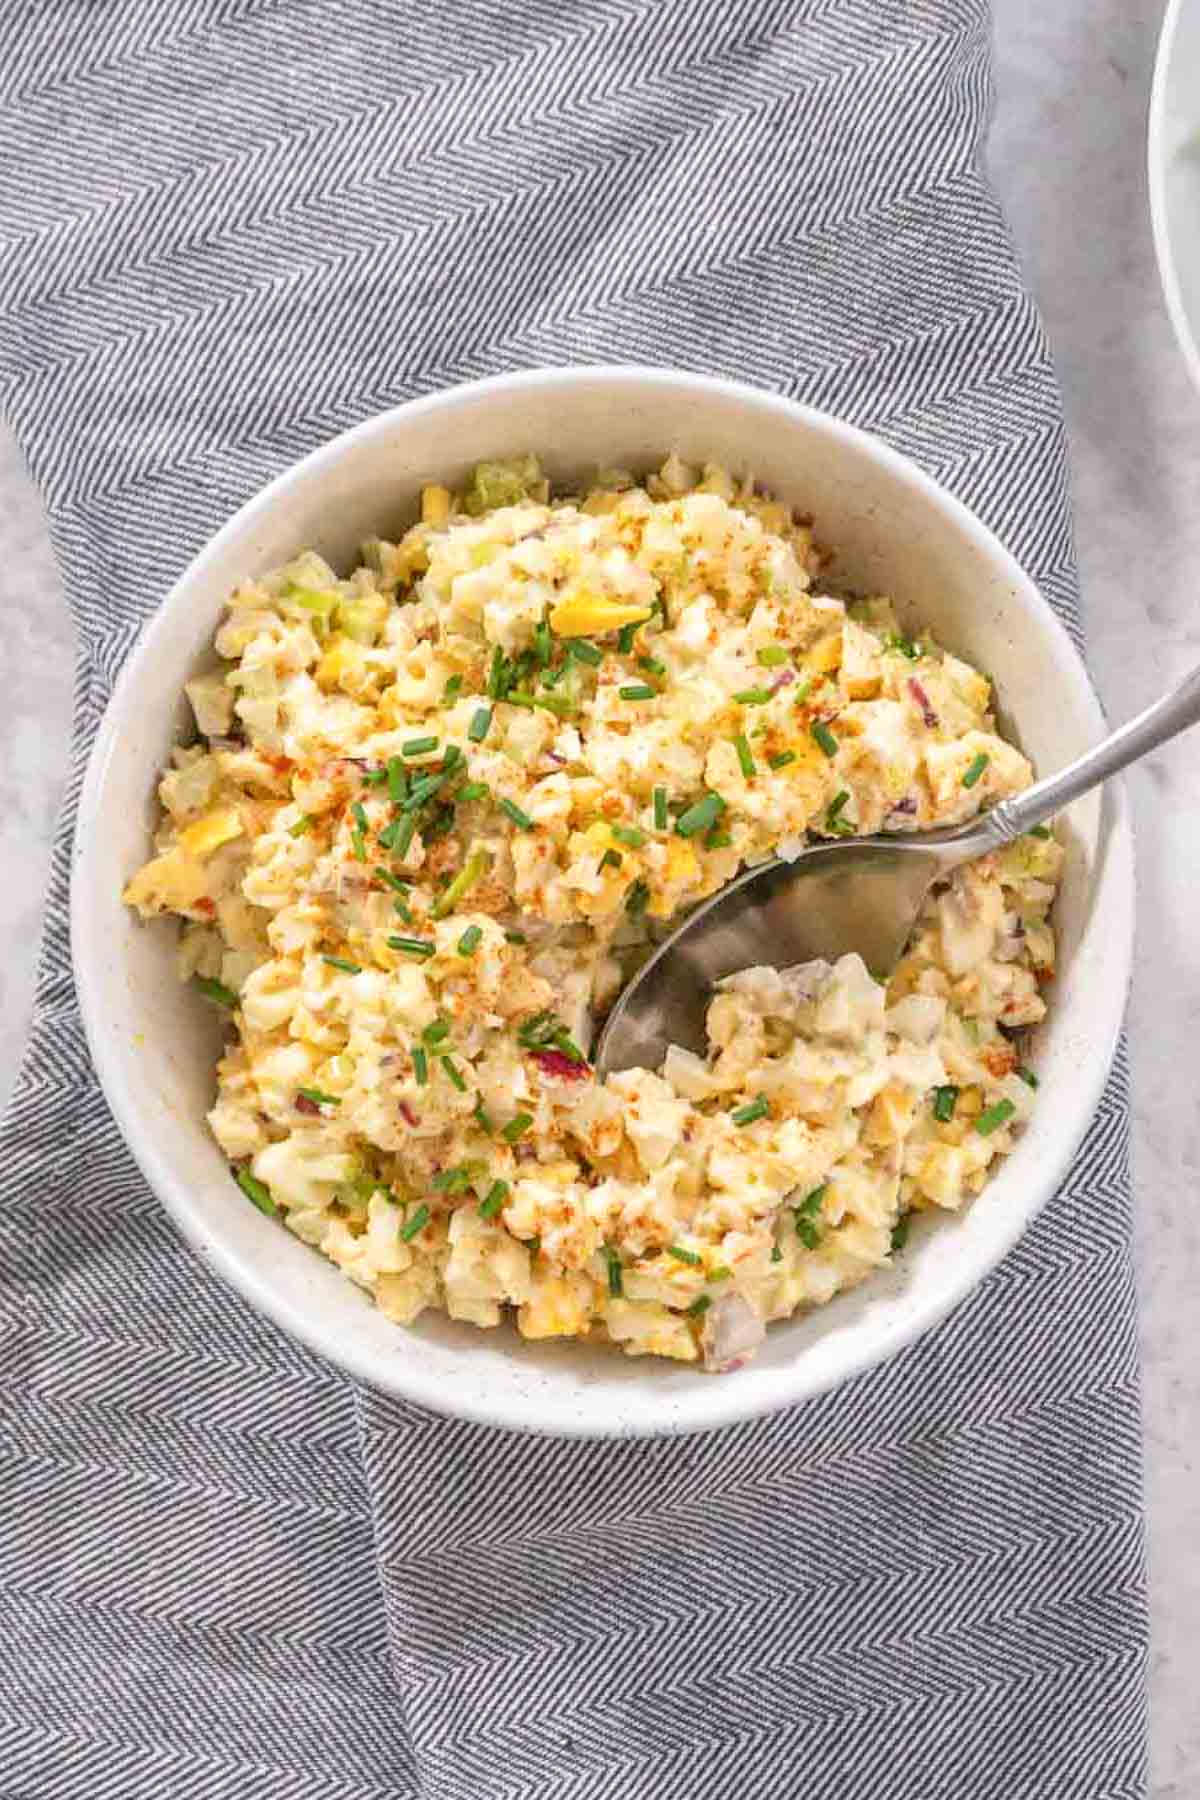 Top down view of Instant Pot Egg Salad in a white bowl with a metal spoon scooping out a bite.